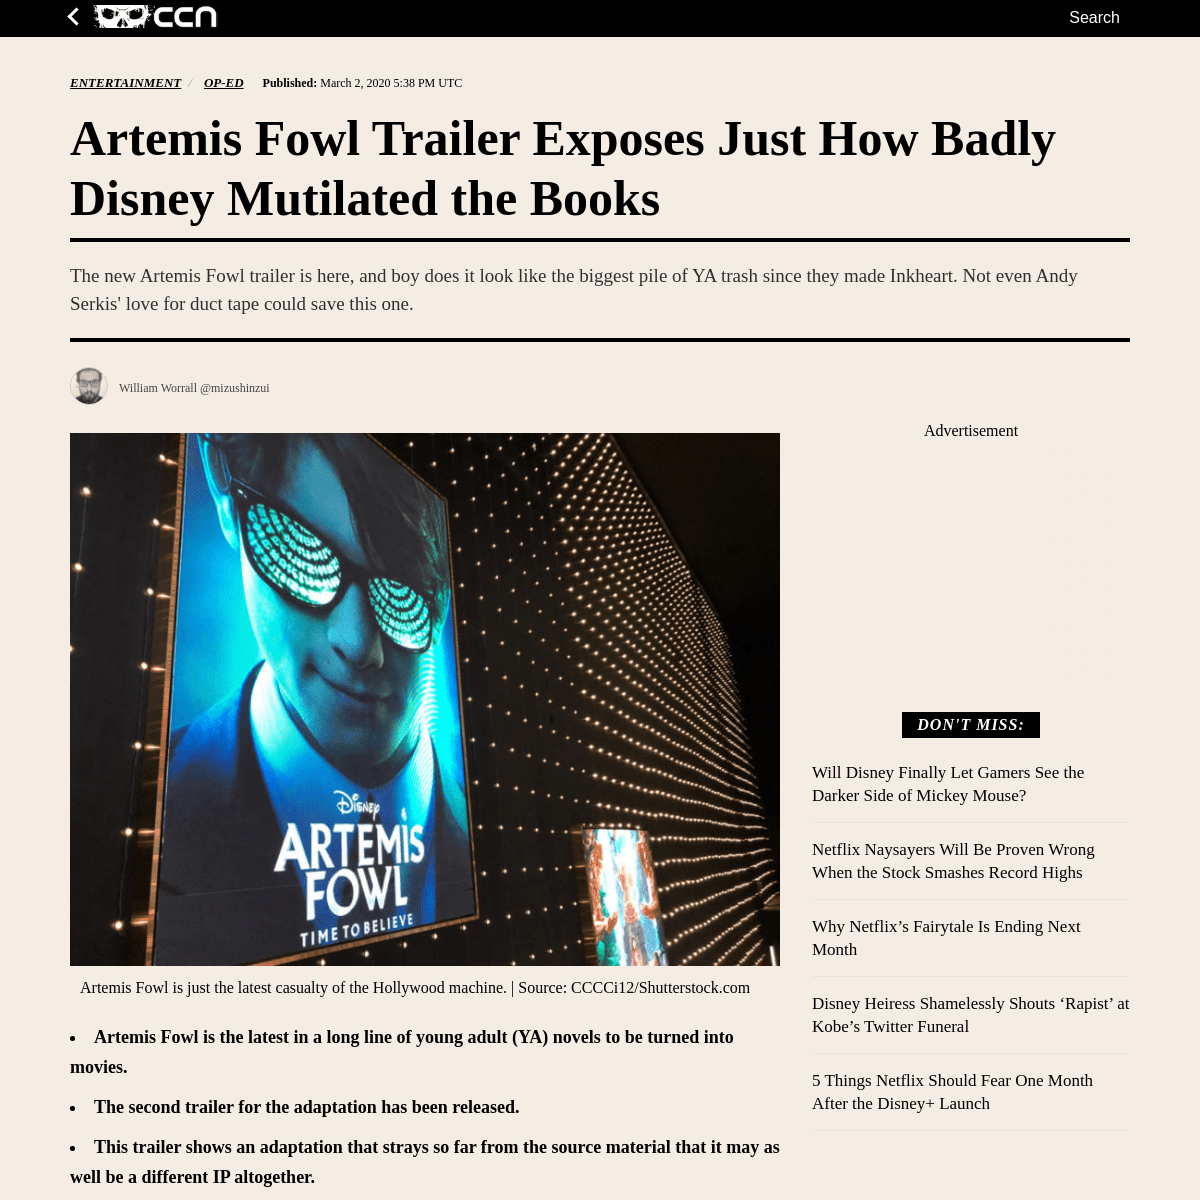 A complete backup of www.ccn.com/artemis-fowl-trailer-exposes-just-how-badly-disney-mutilated-the-books/